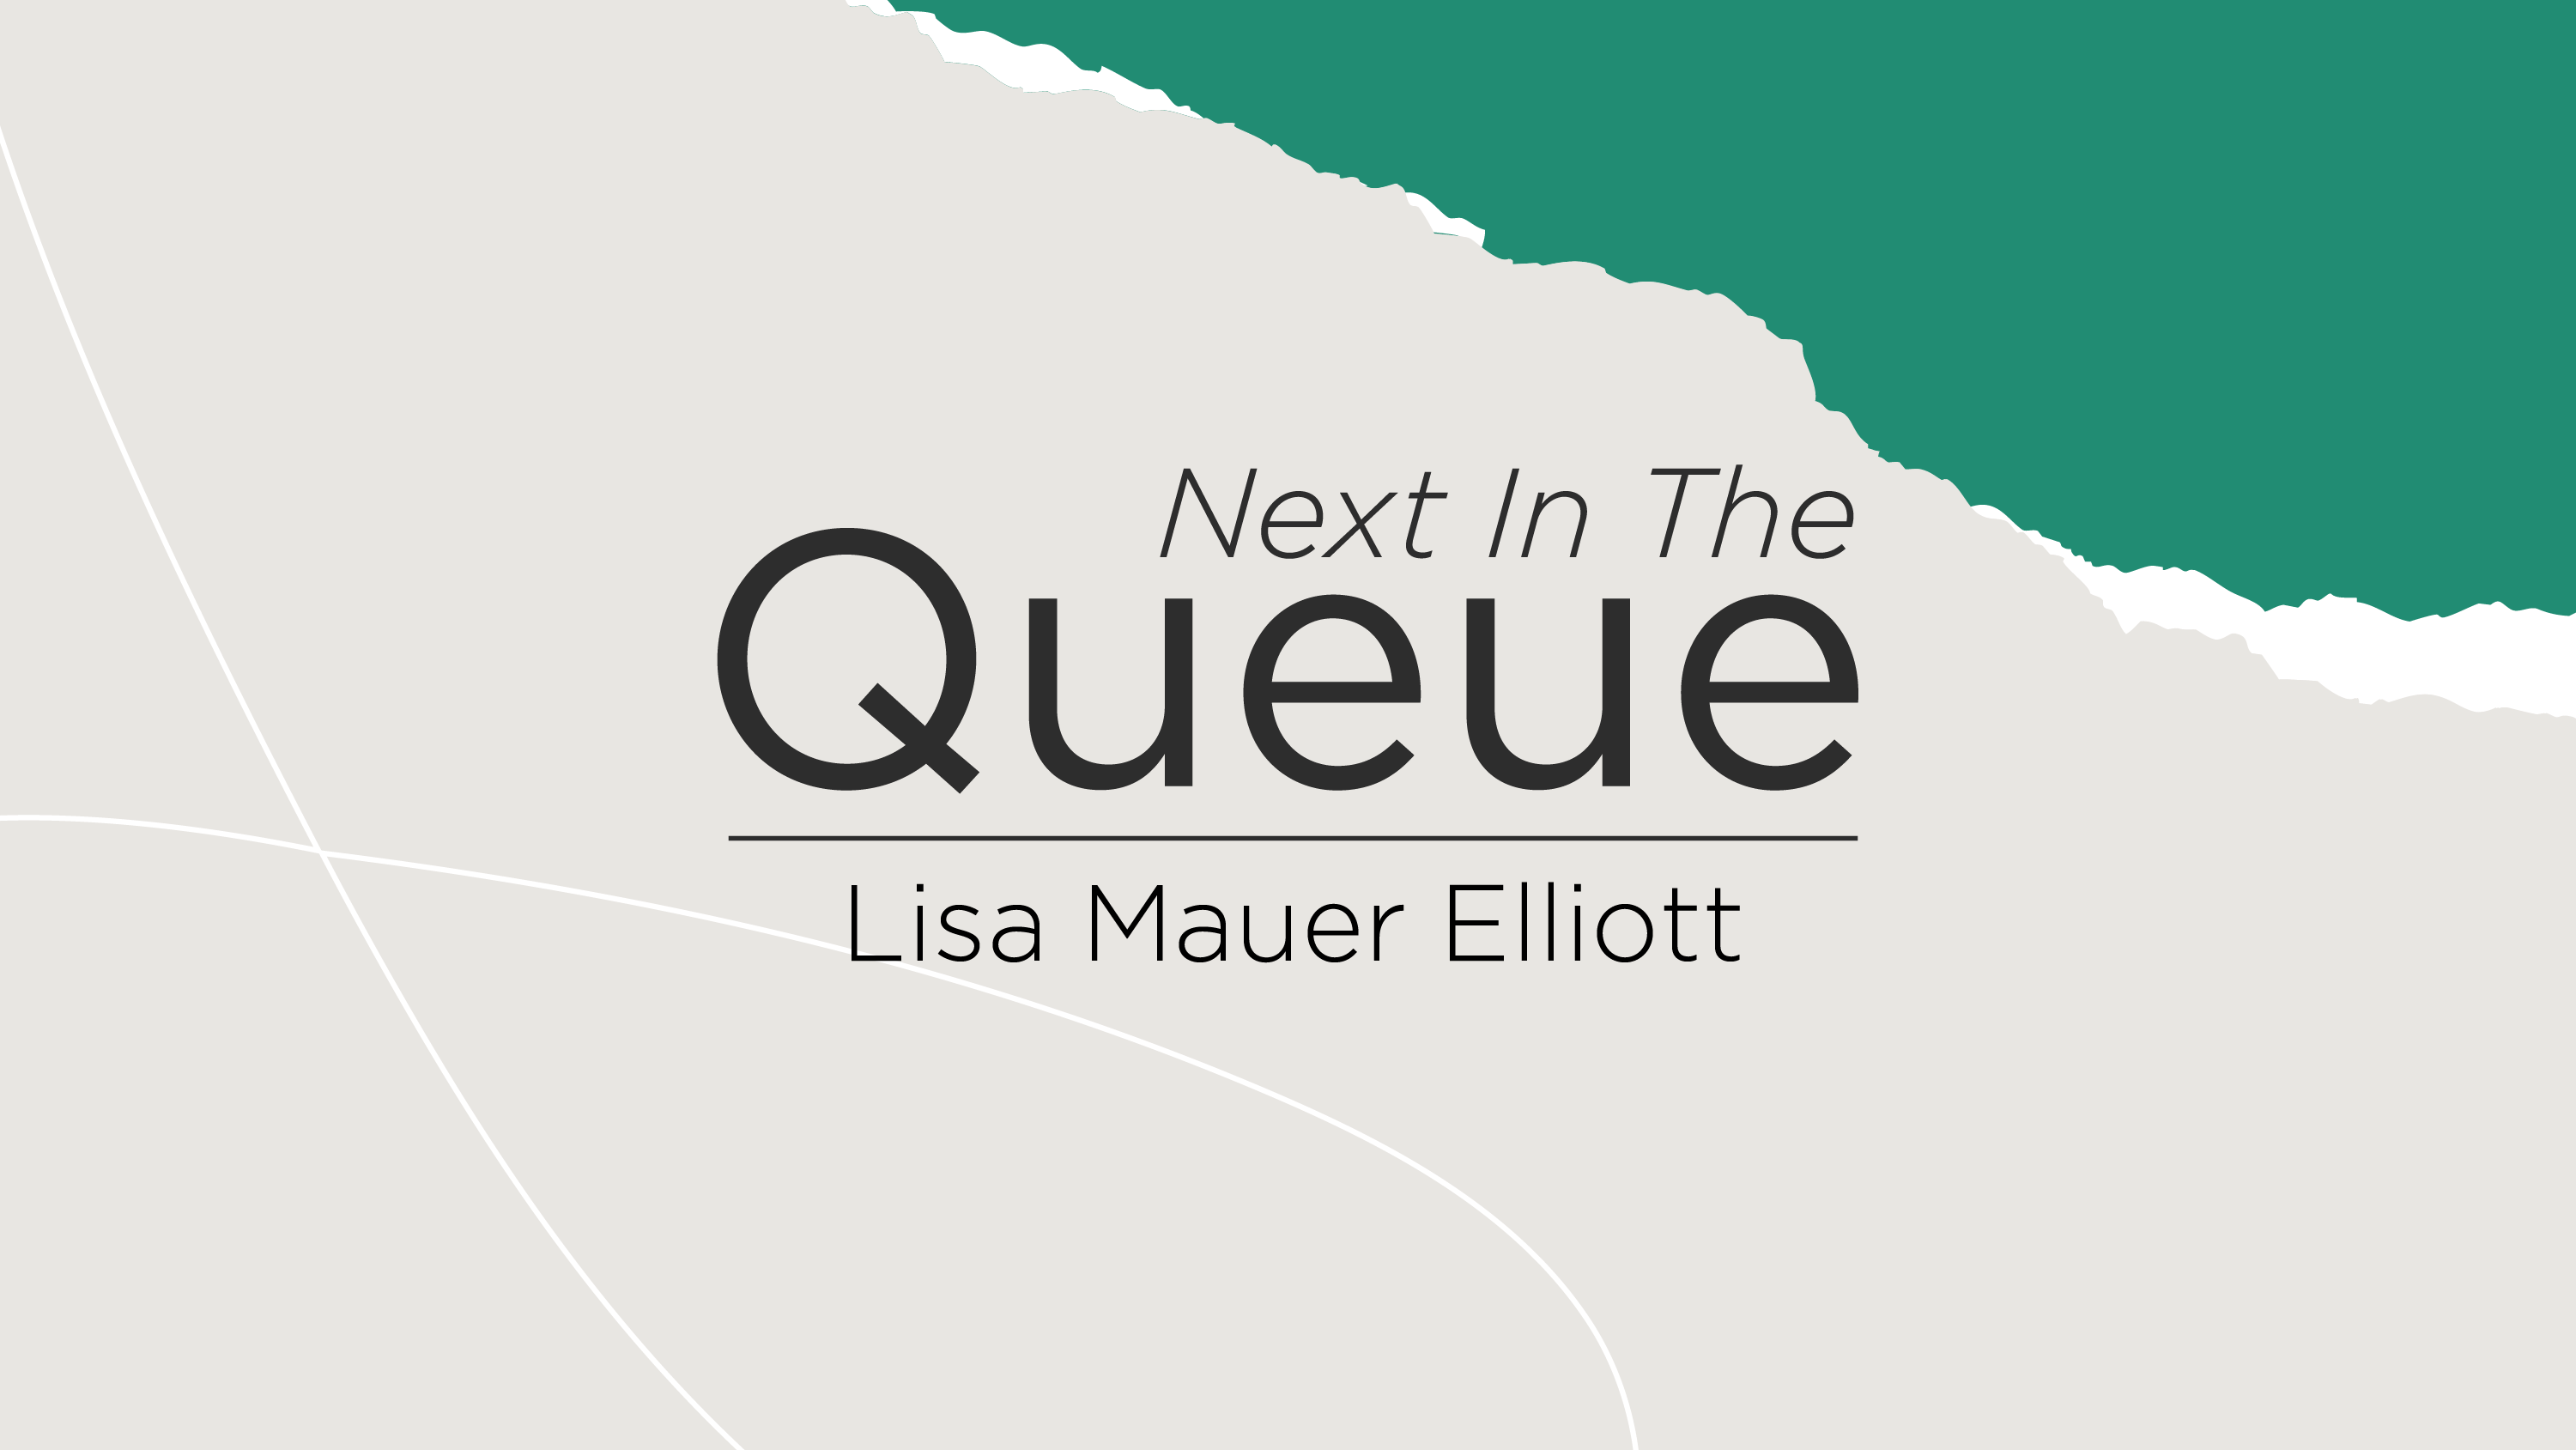 blog post cover graphic for The Queue featuring Lisa Mauer Elliott